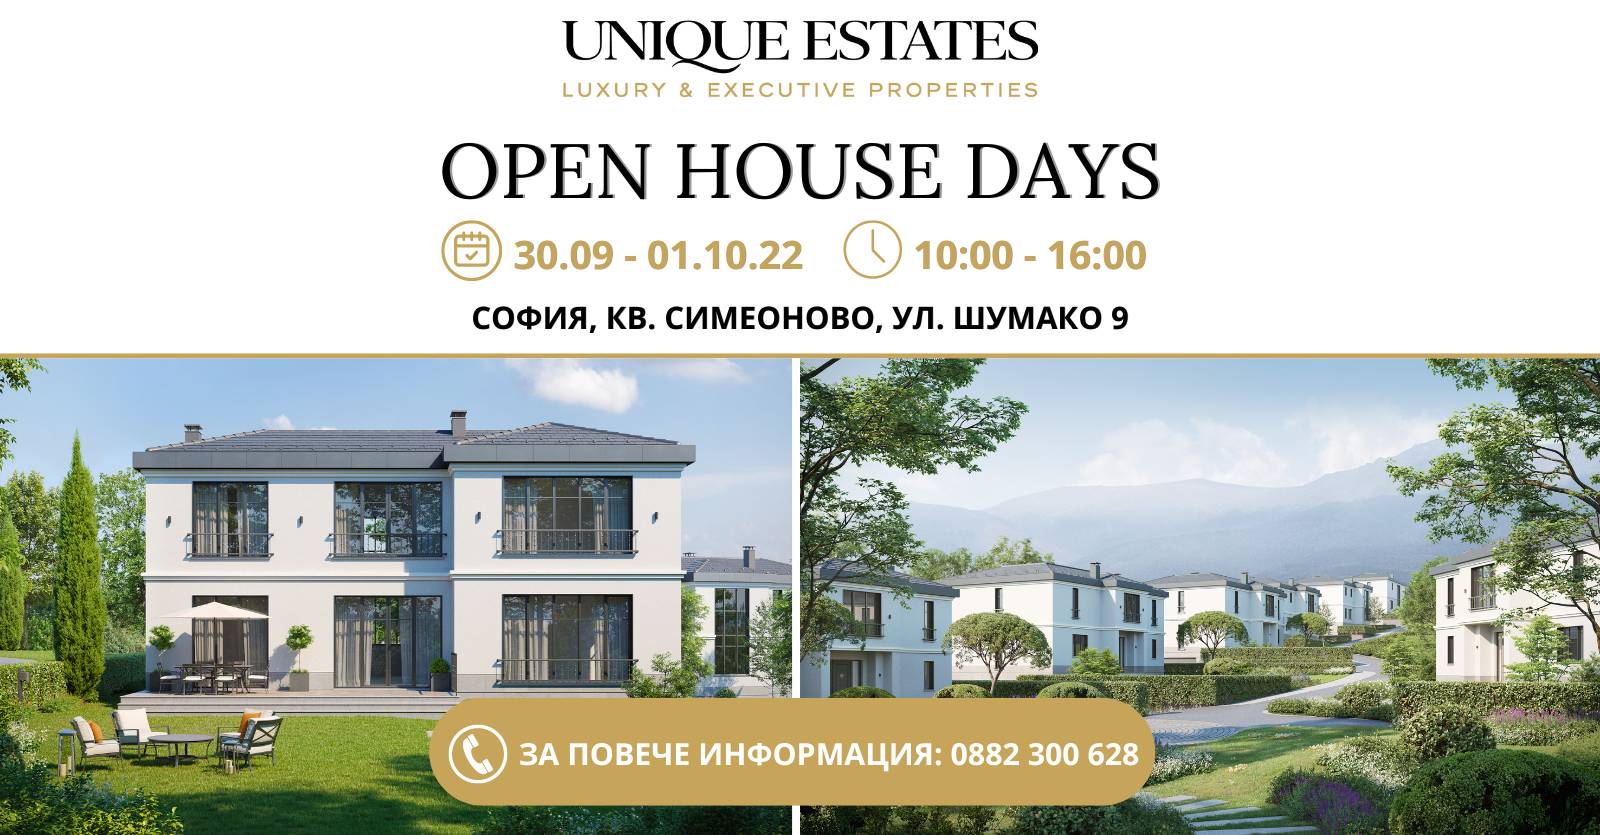 Open House Days in a complex of luxury houses in Simeonovo